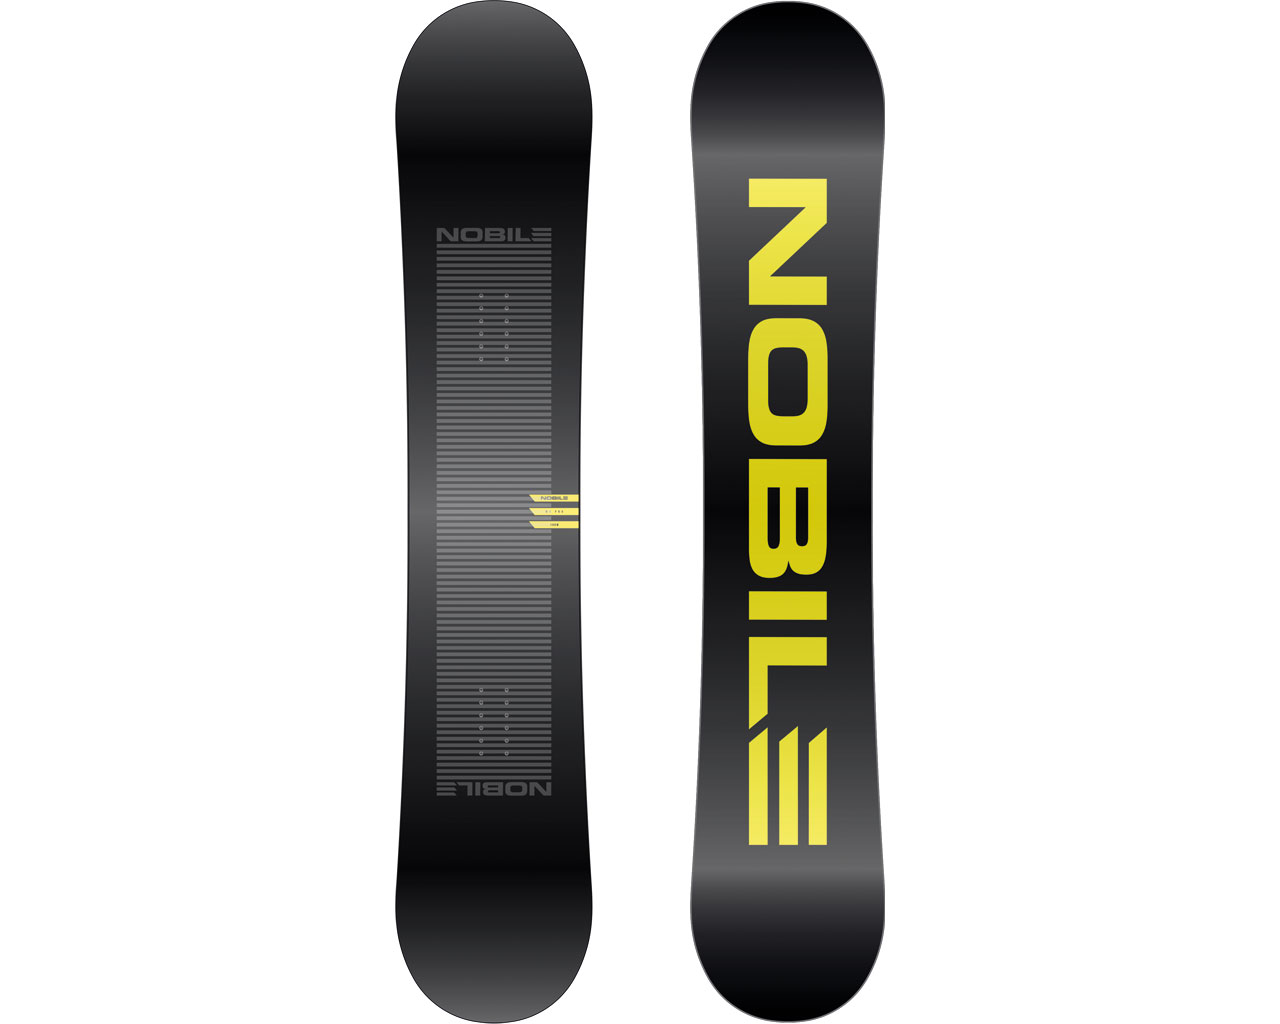 Nobile FW20/21 Snowboard Preview